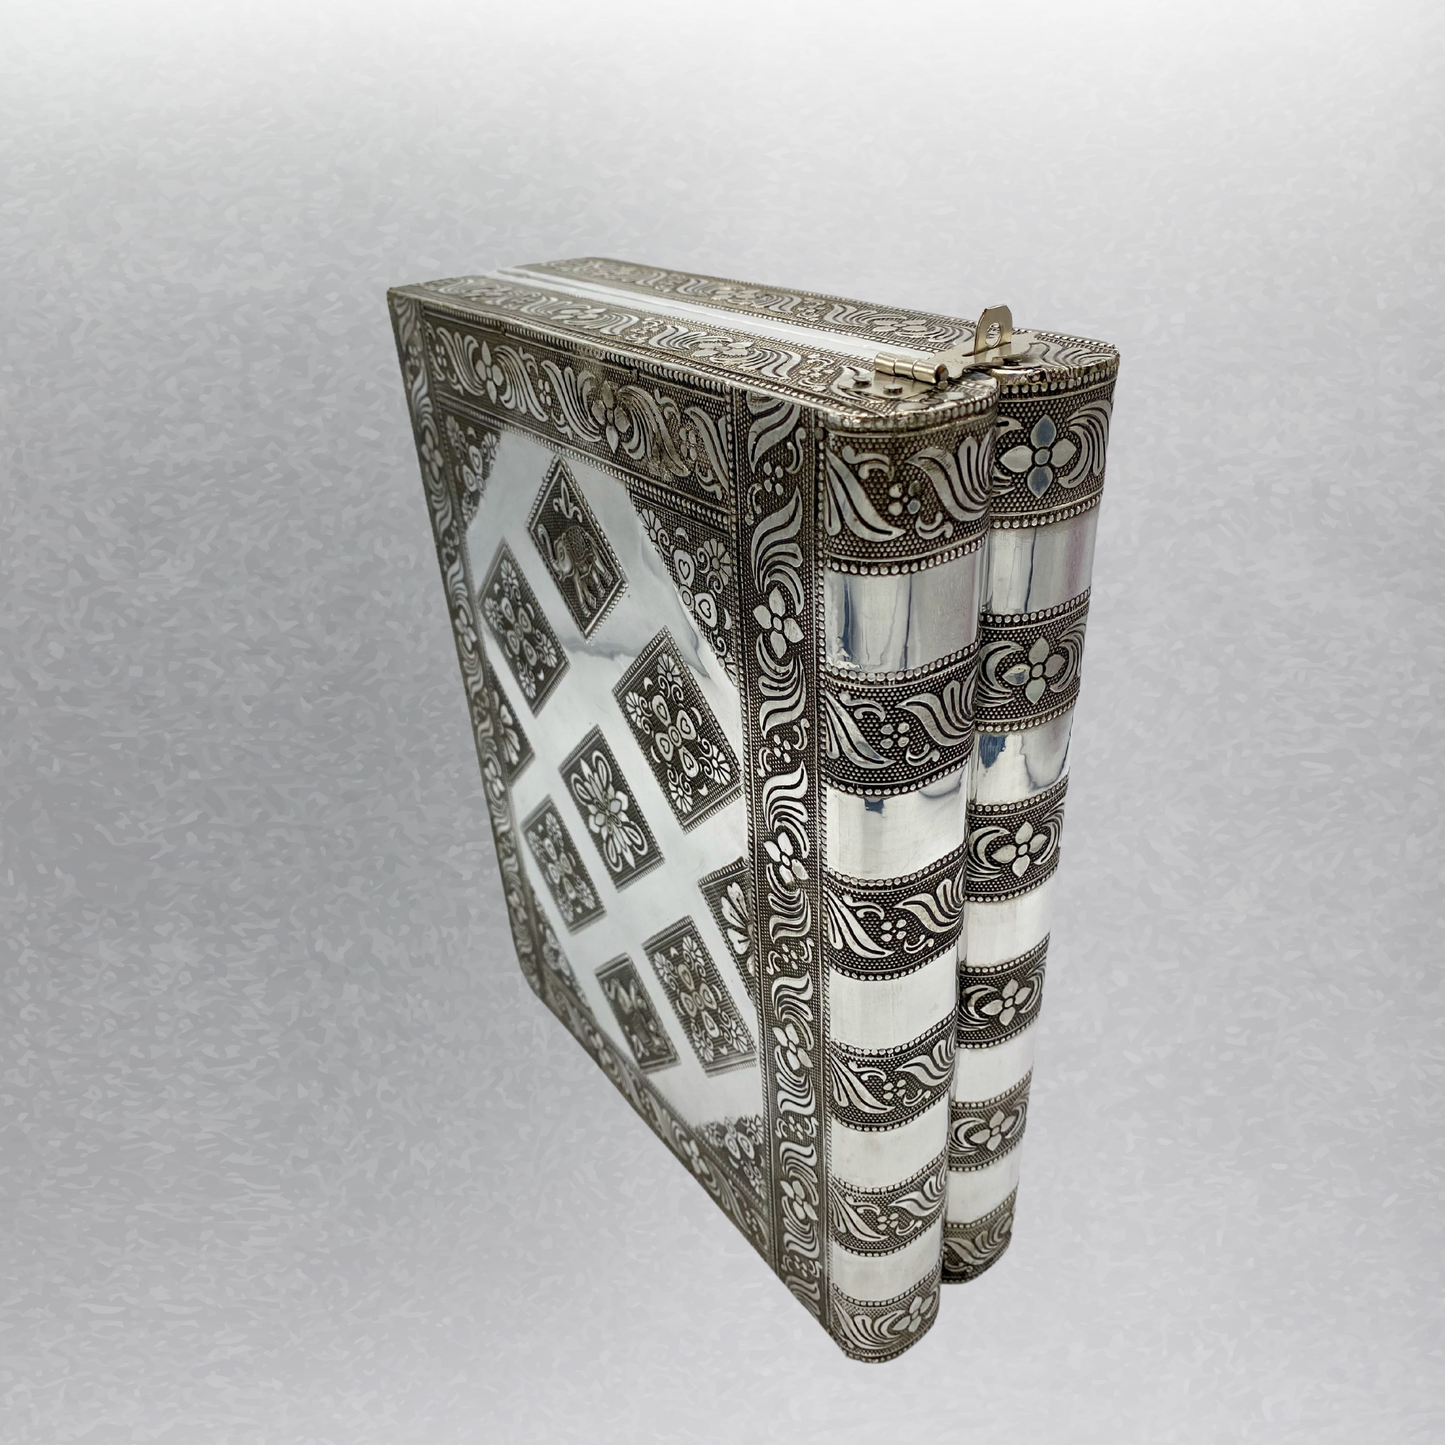 Indian Jewelry Box with Book-like design and latch